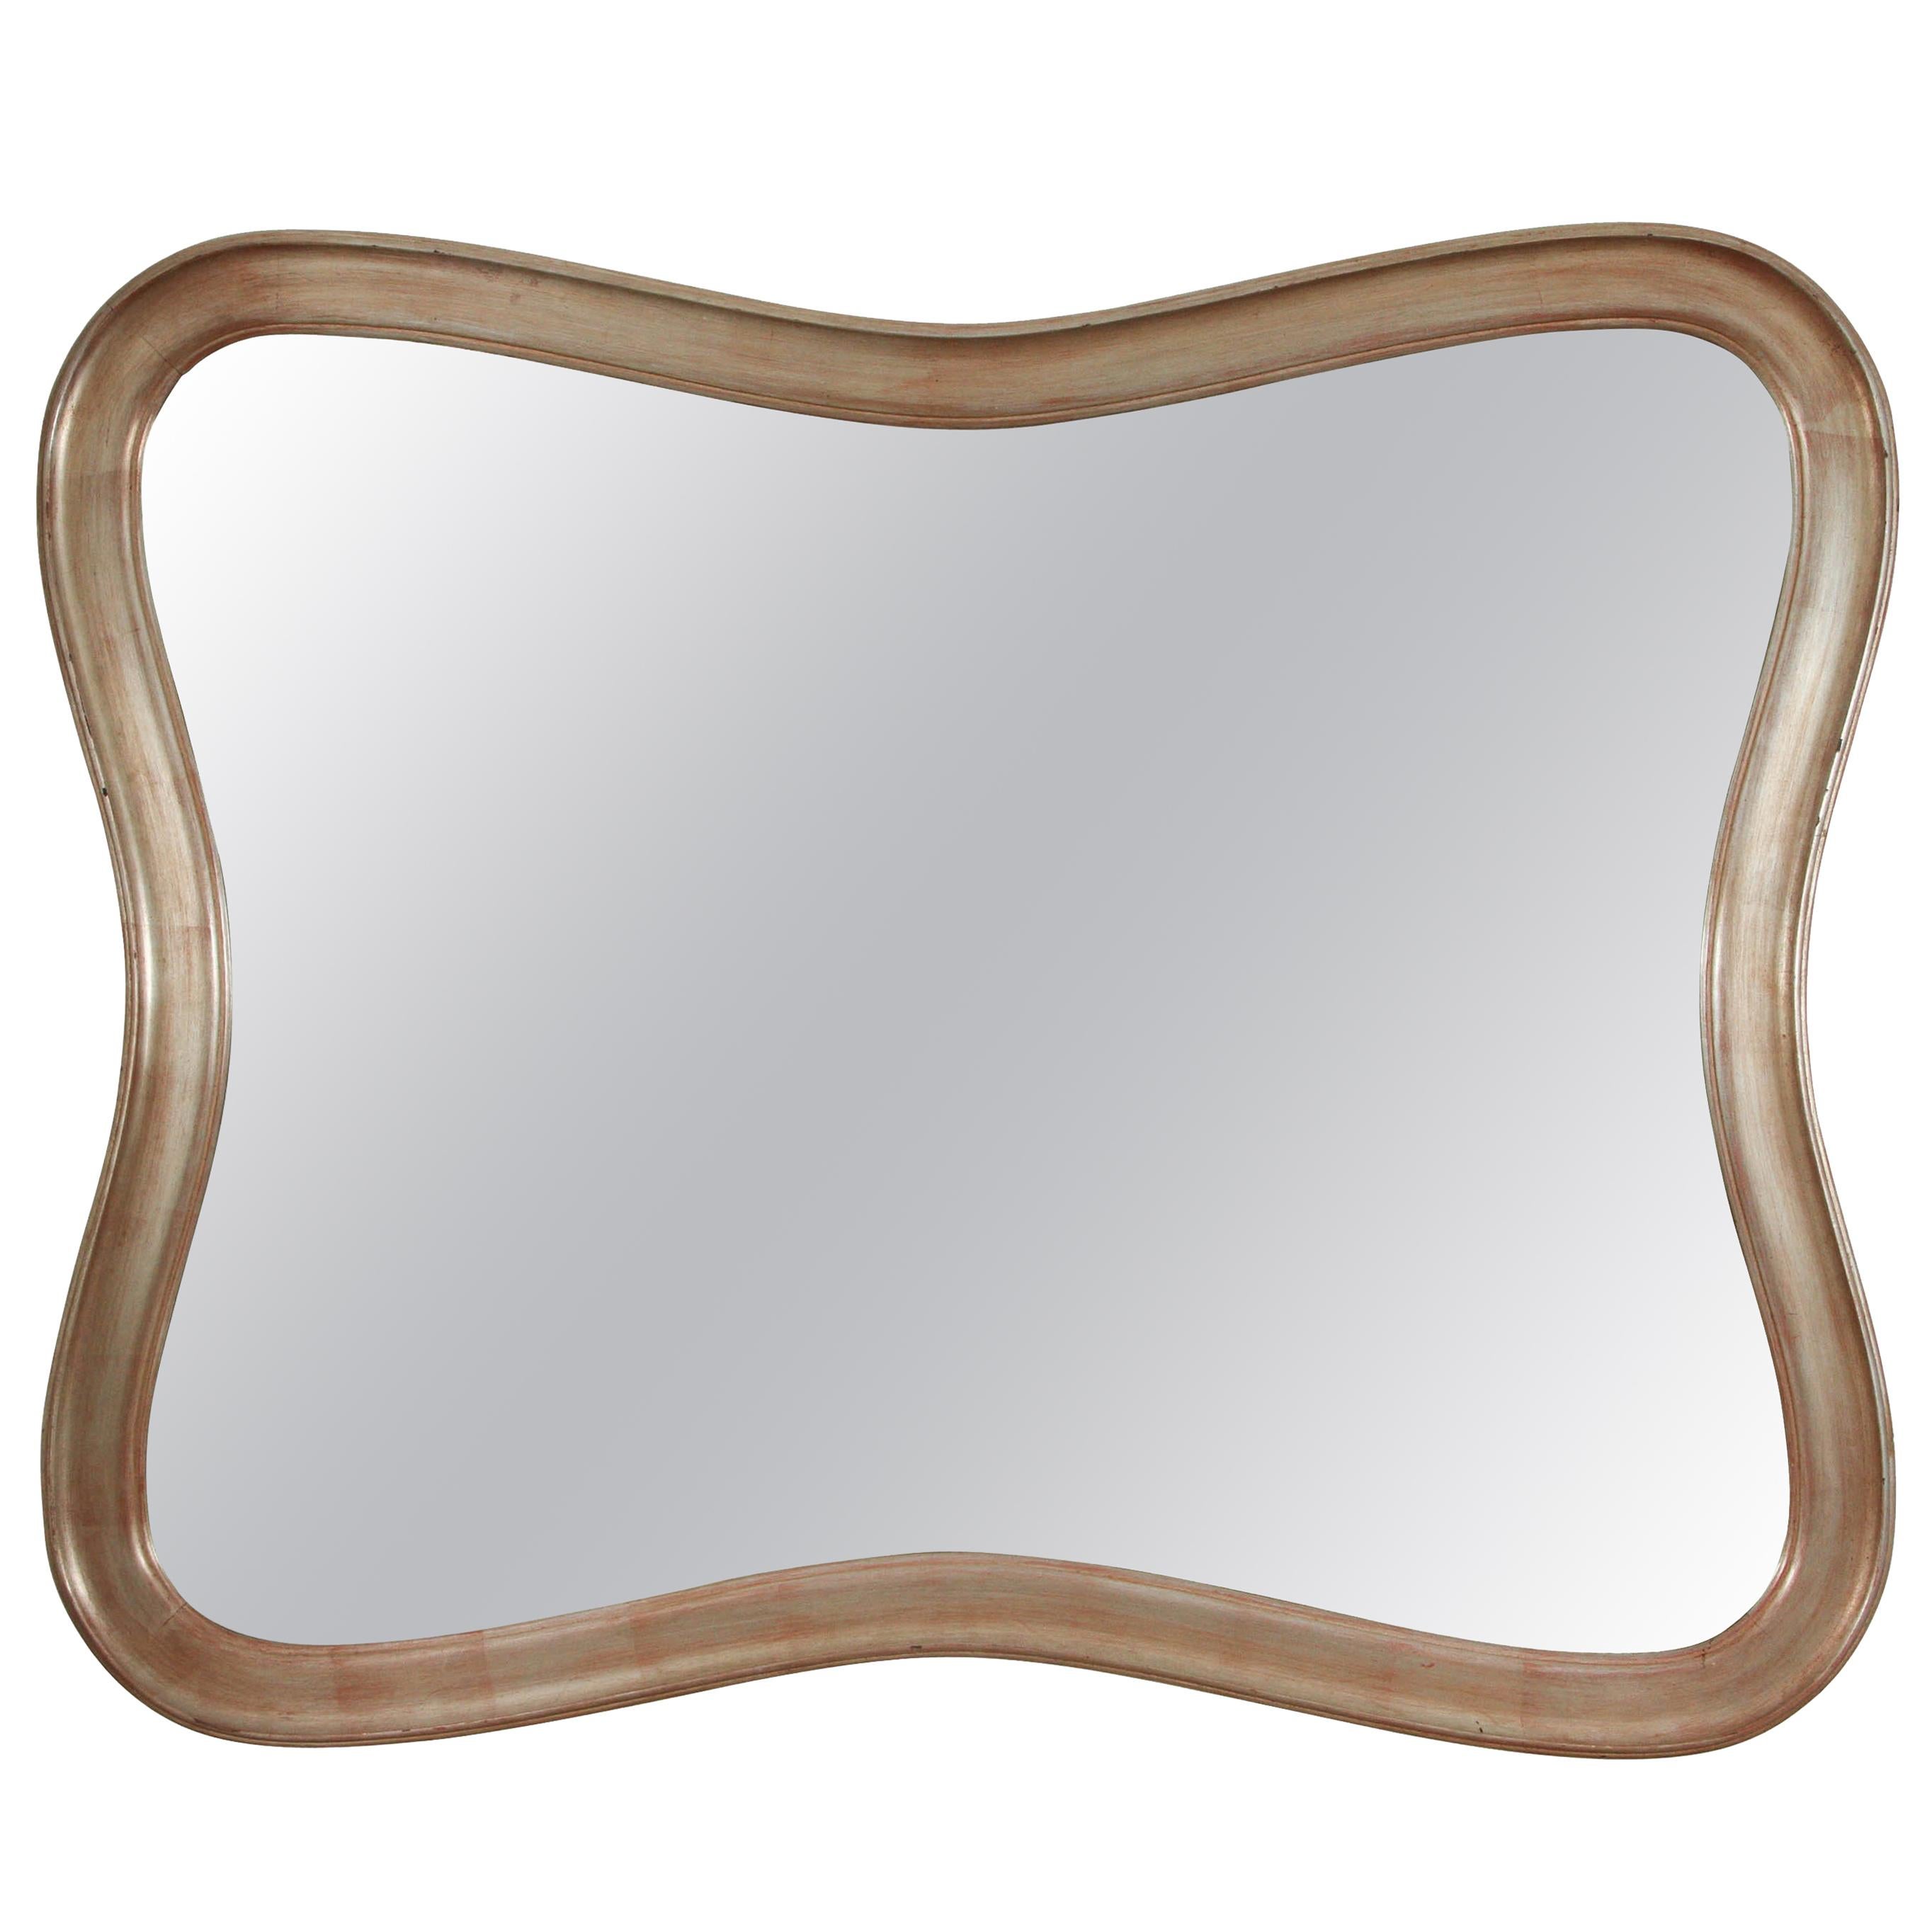 Rare "Rococo" Modern Mirror by James Mont For Sale